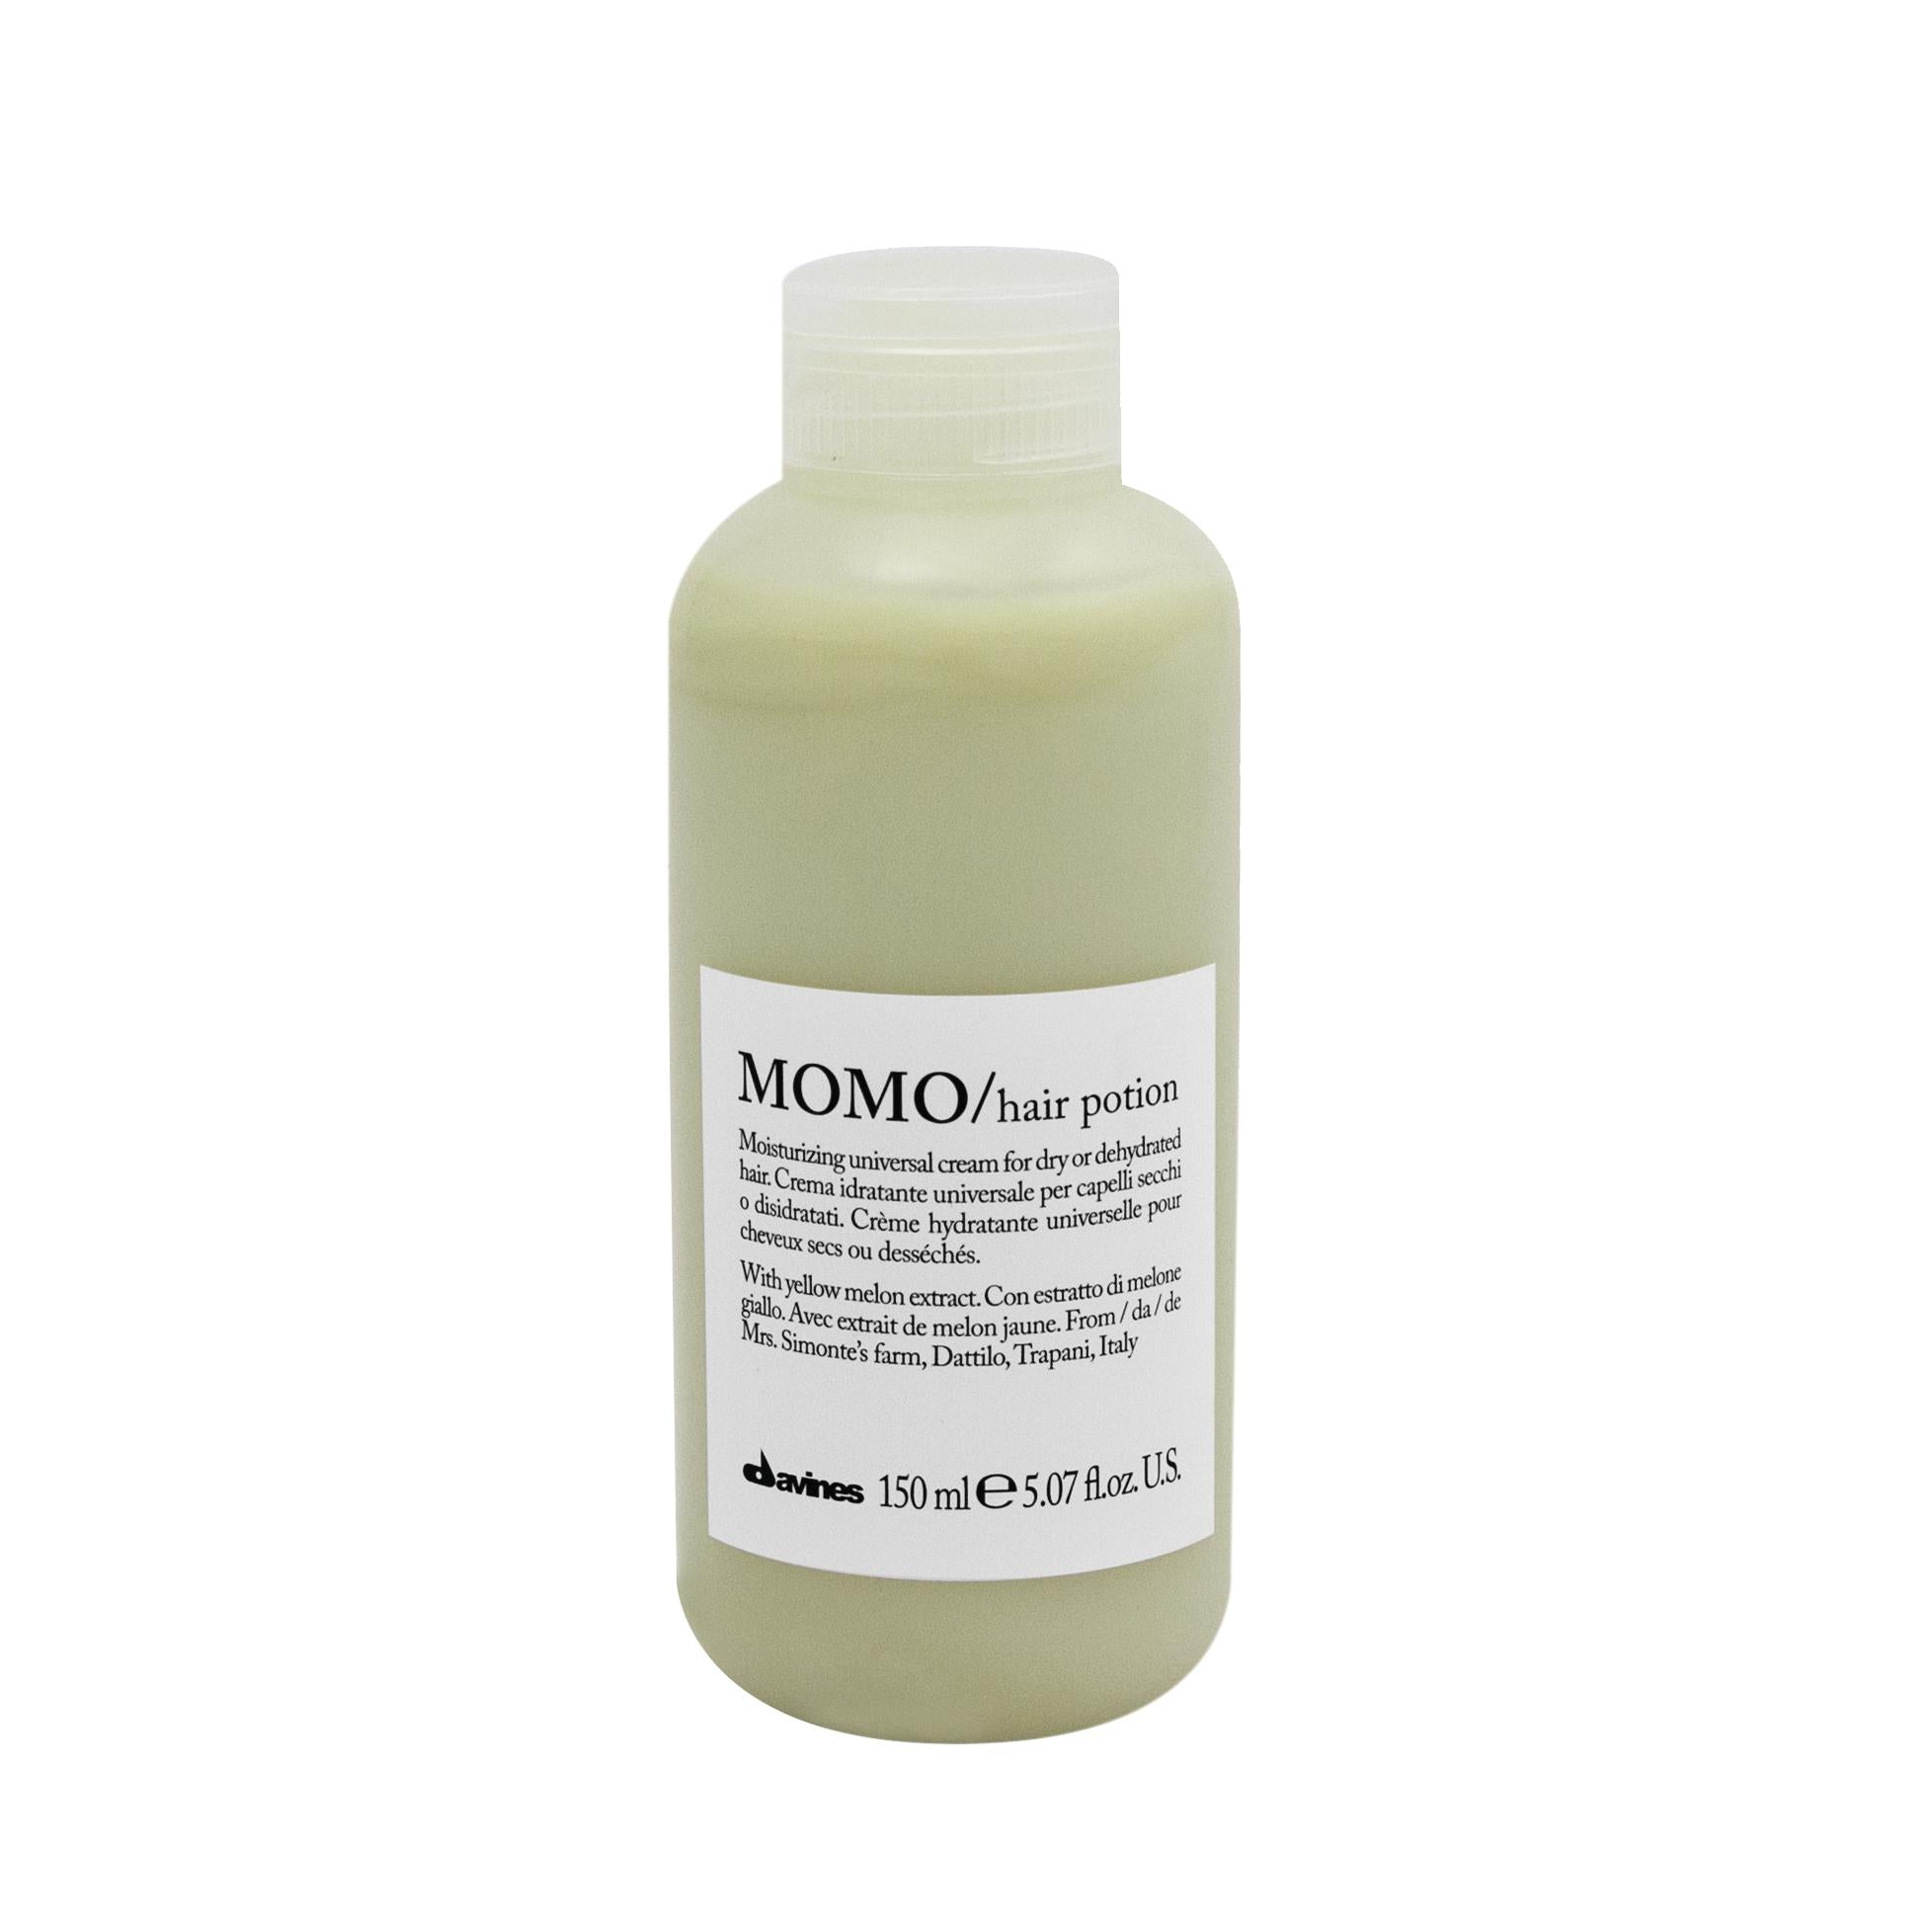 MOMO Hair Potion-Leave-In conditioner-Luxury Haircare Company